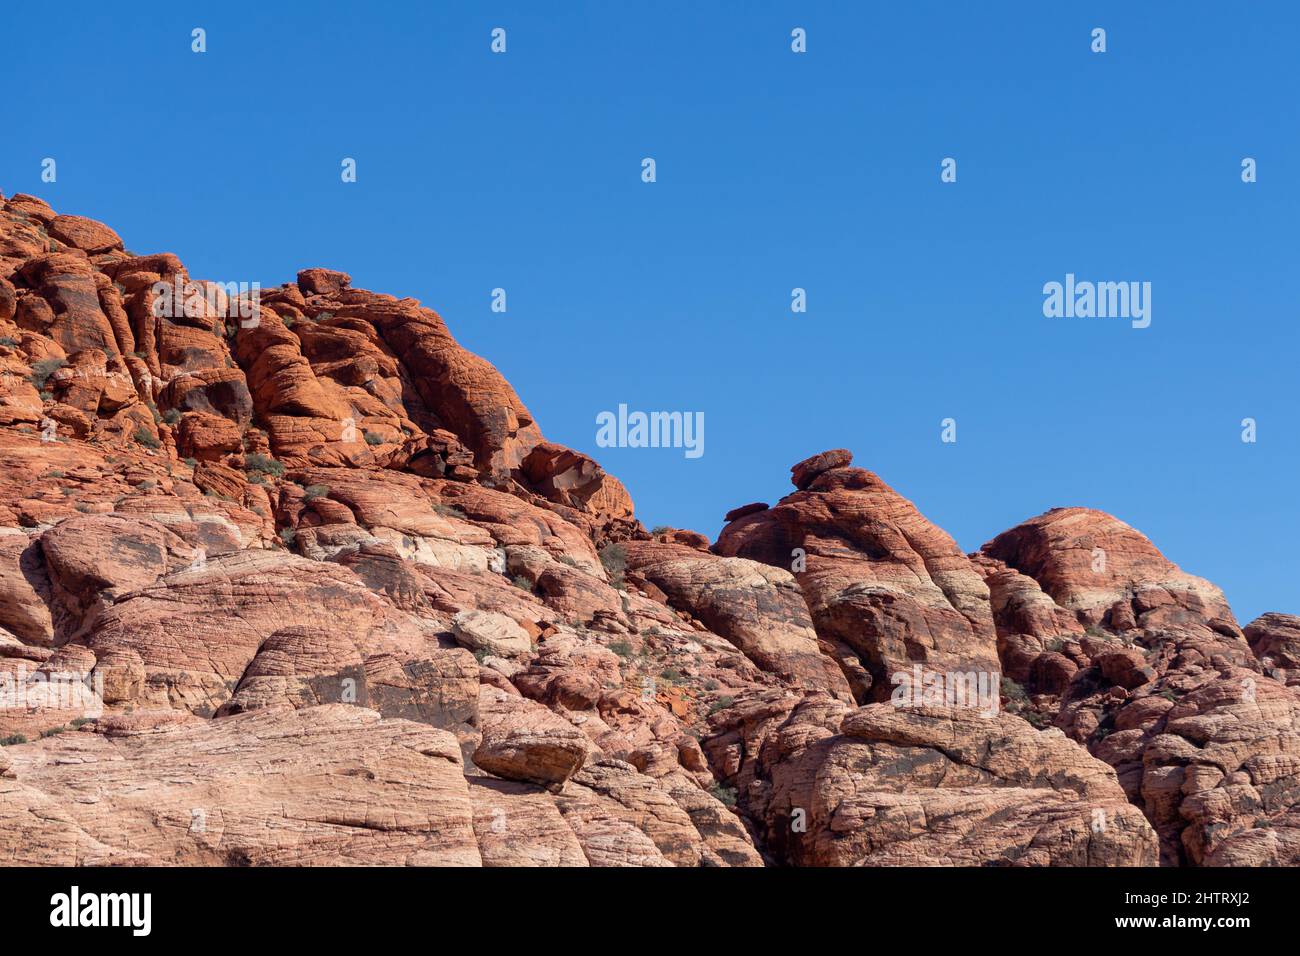 Upper portion of rock formation at Red Rock Canyon in Nevada with copy space Stock Photo